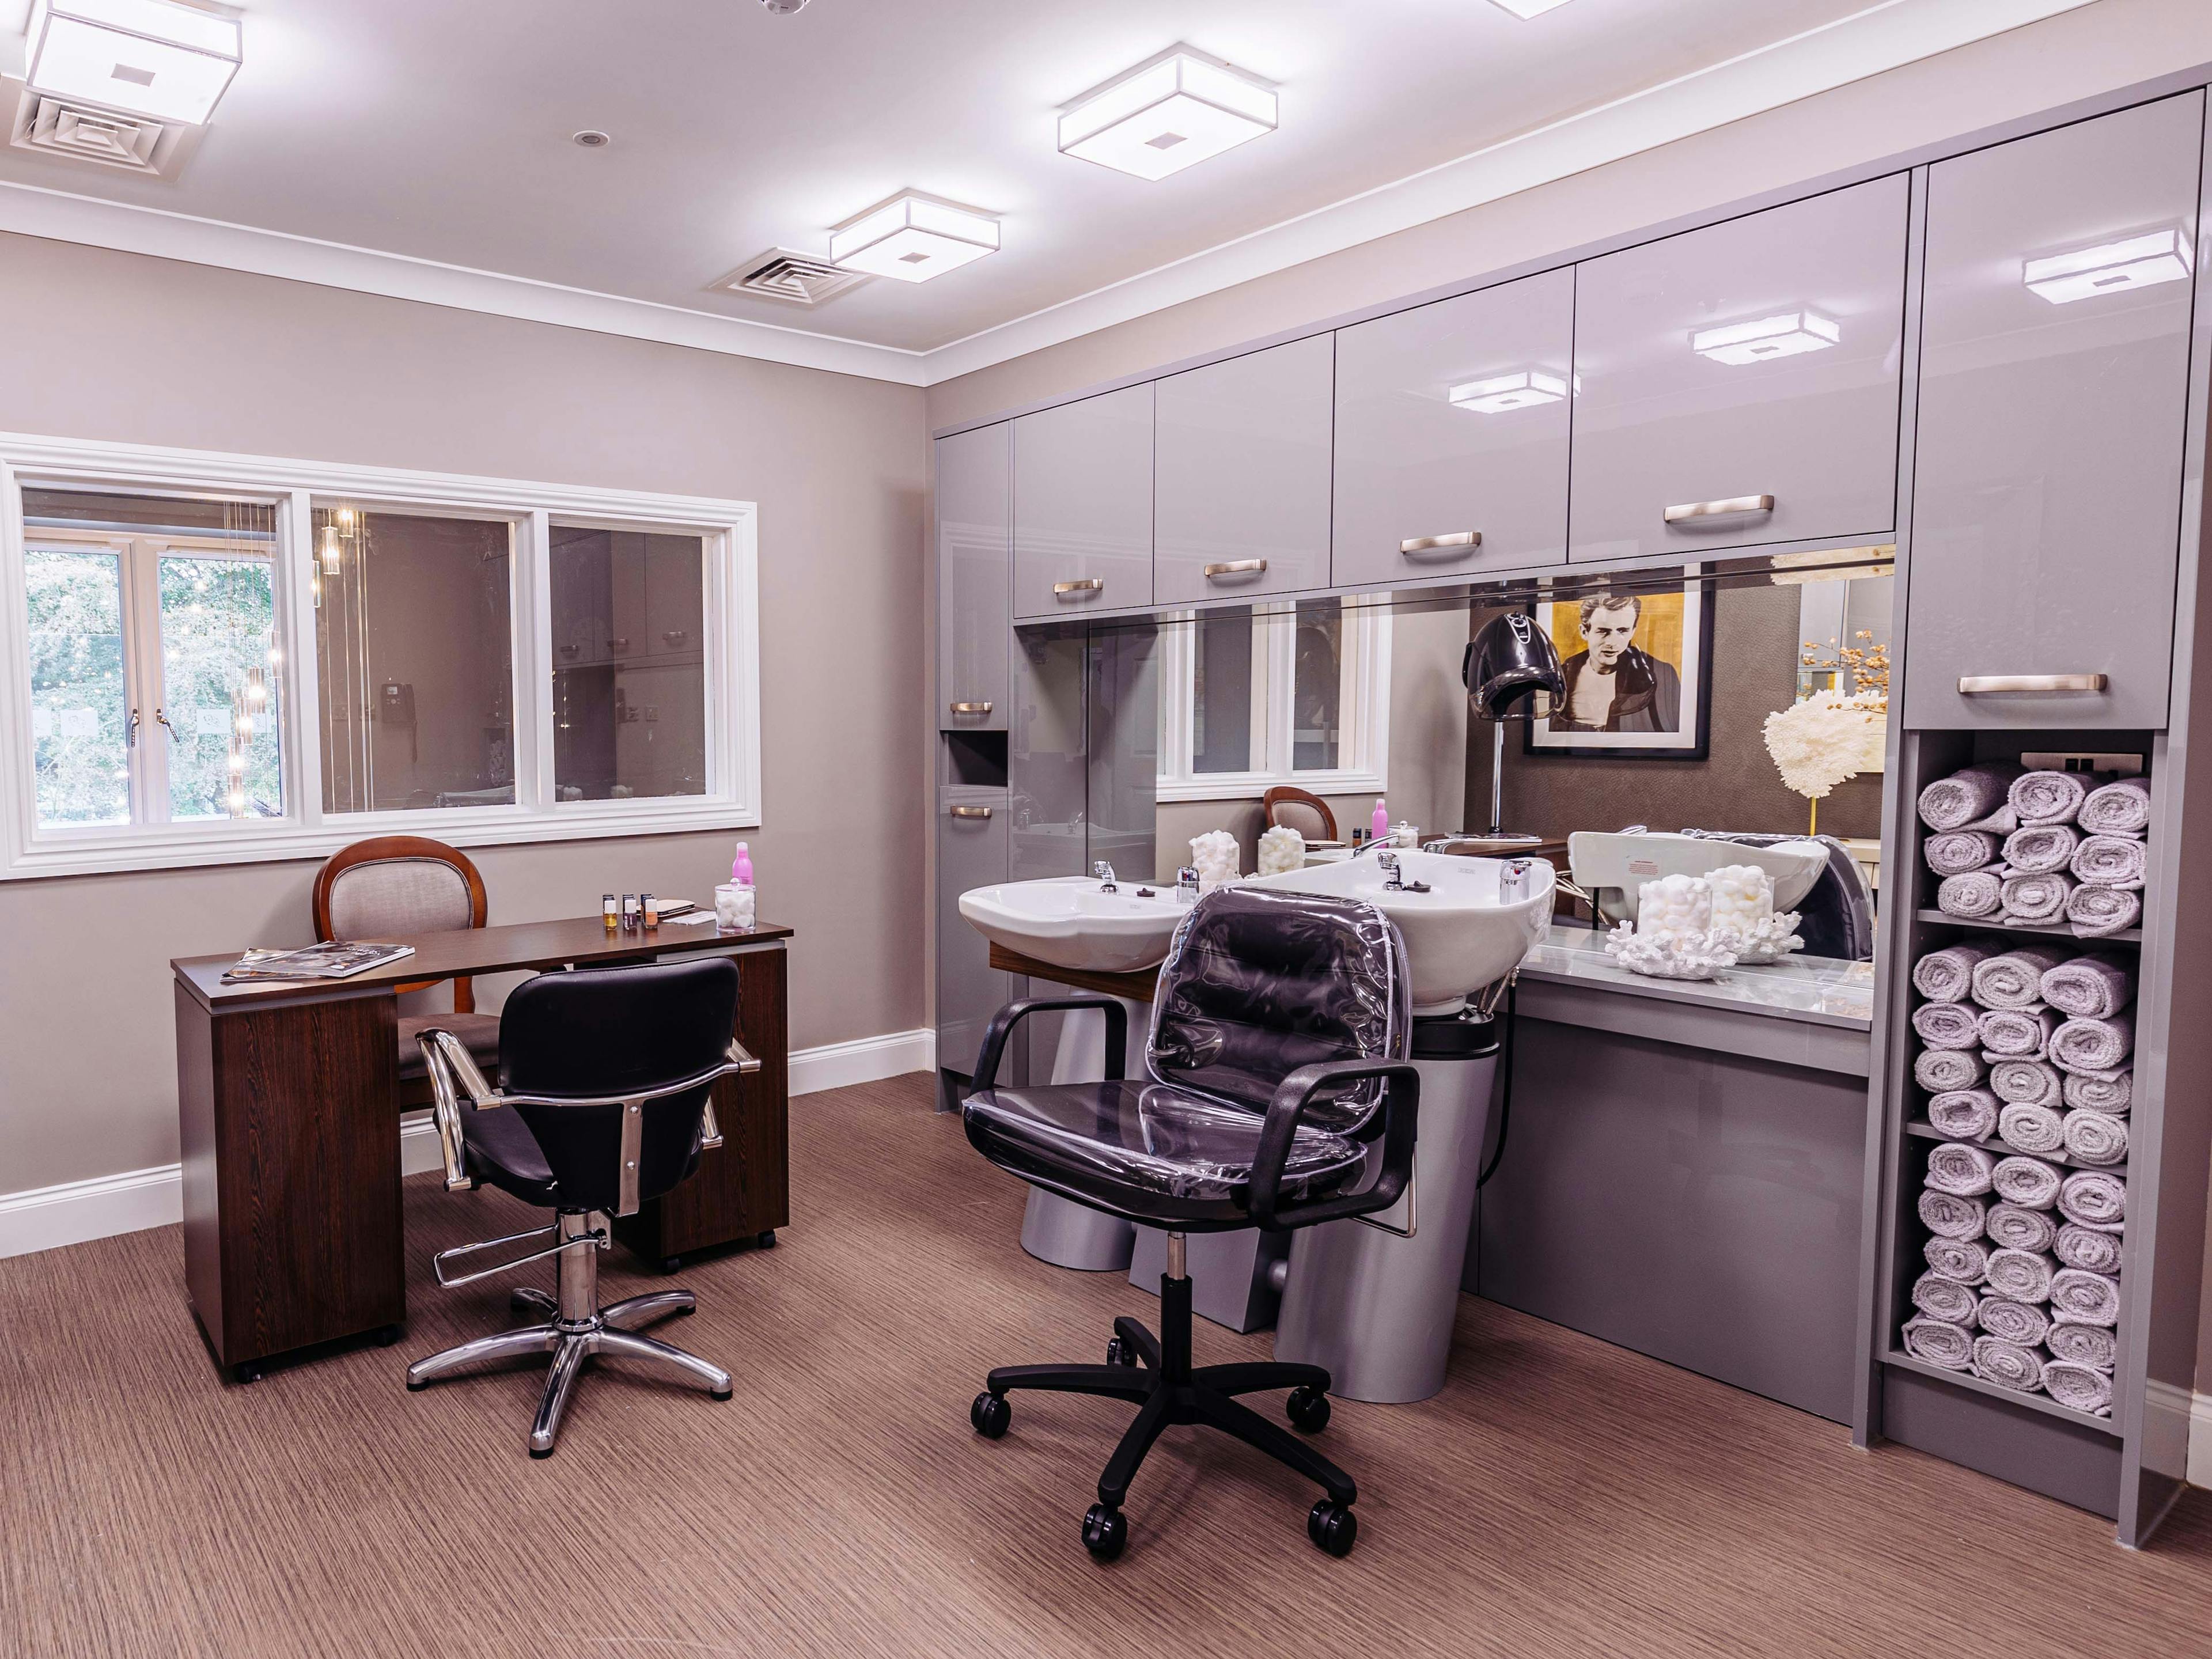 Salon at Bere Grove Care Home in Horndean, East Hampshire